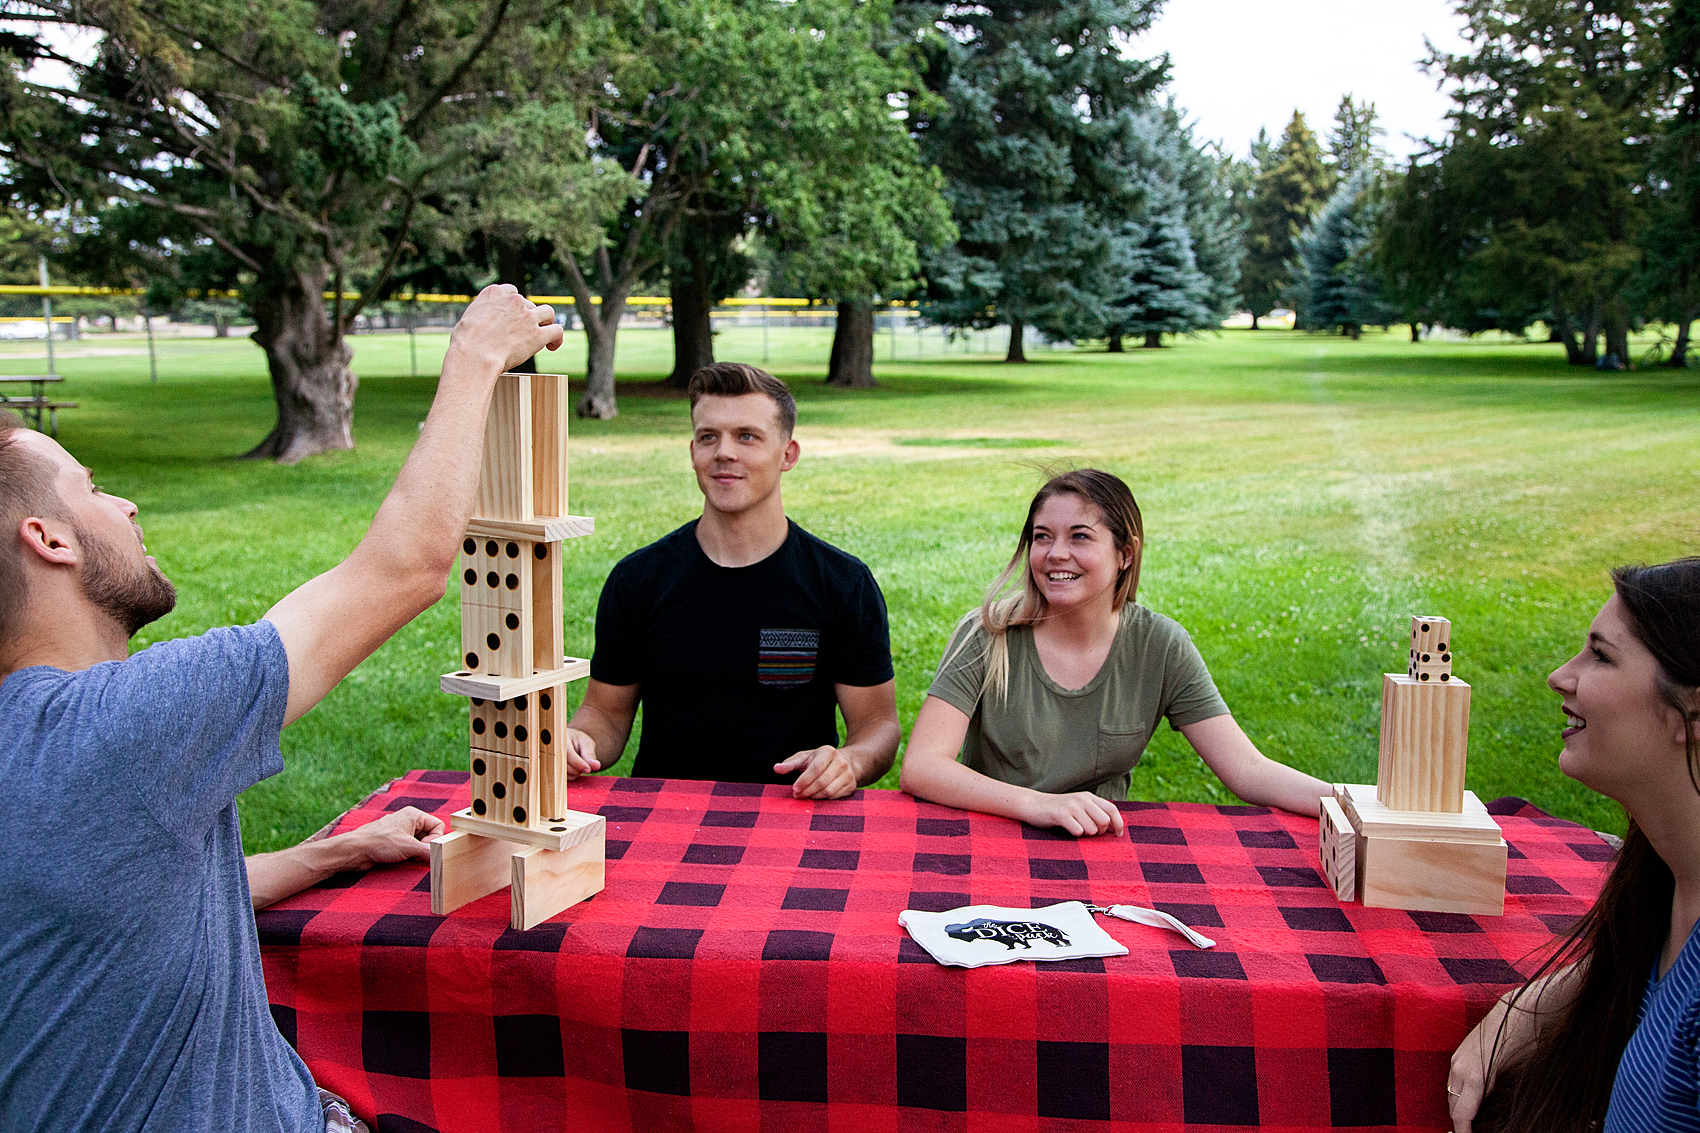 Come learn how to create carefree family fun with simple to make yard games via WhipperBerry.